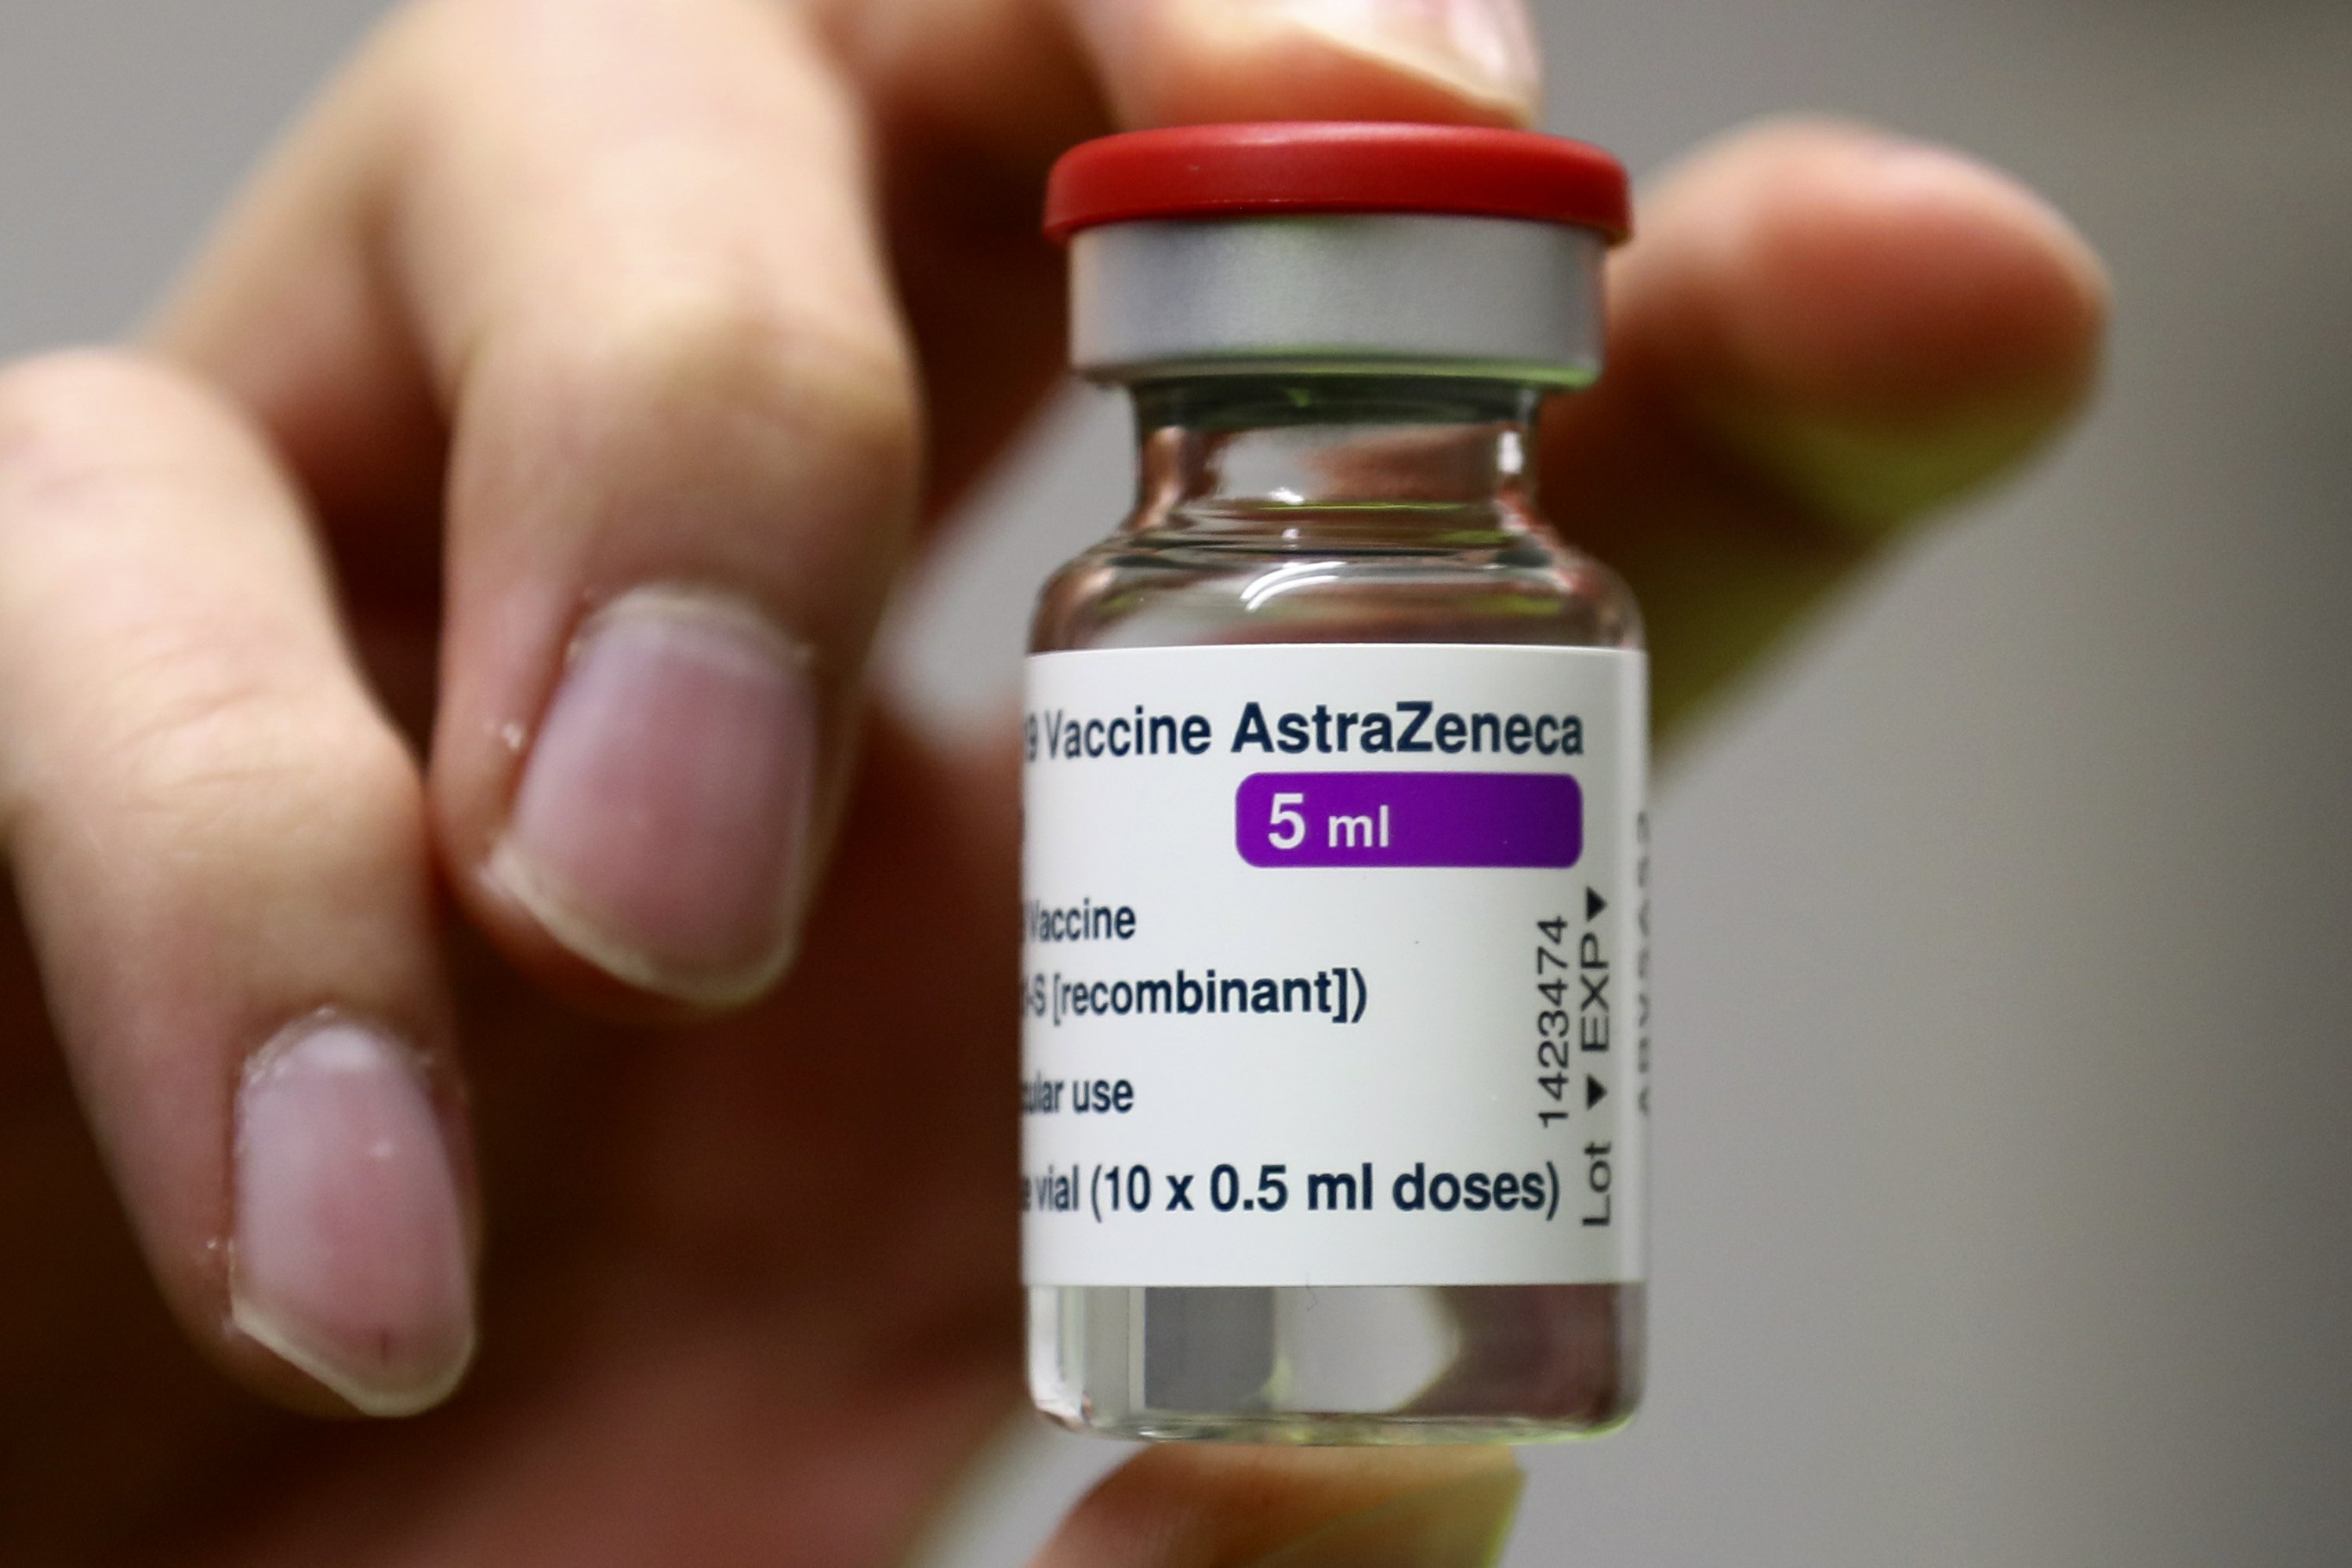 AstraZeneca may have used outdated information in vaccine trials